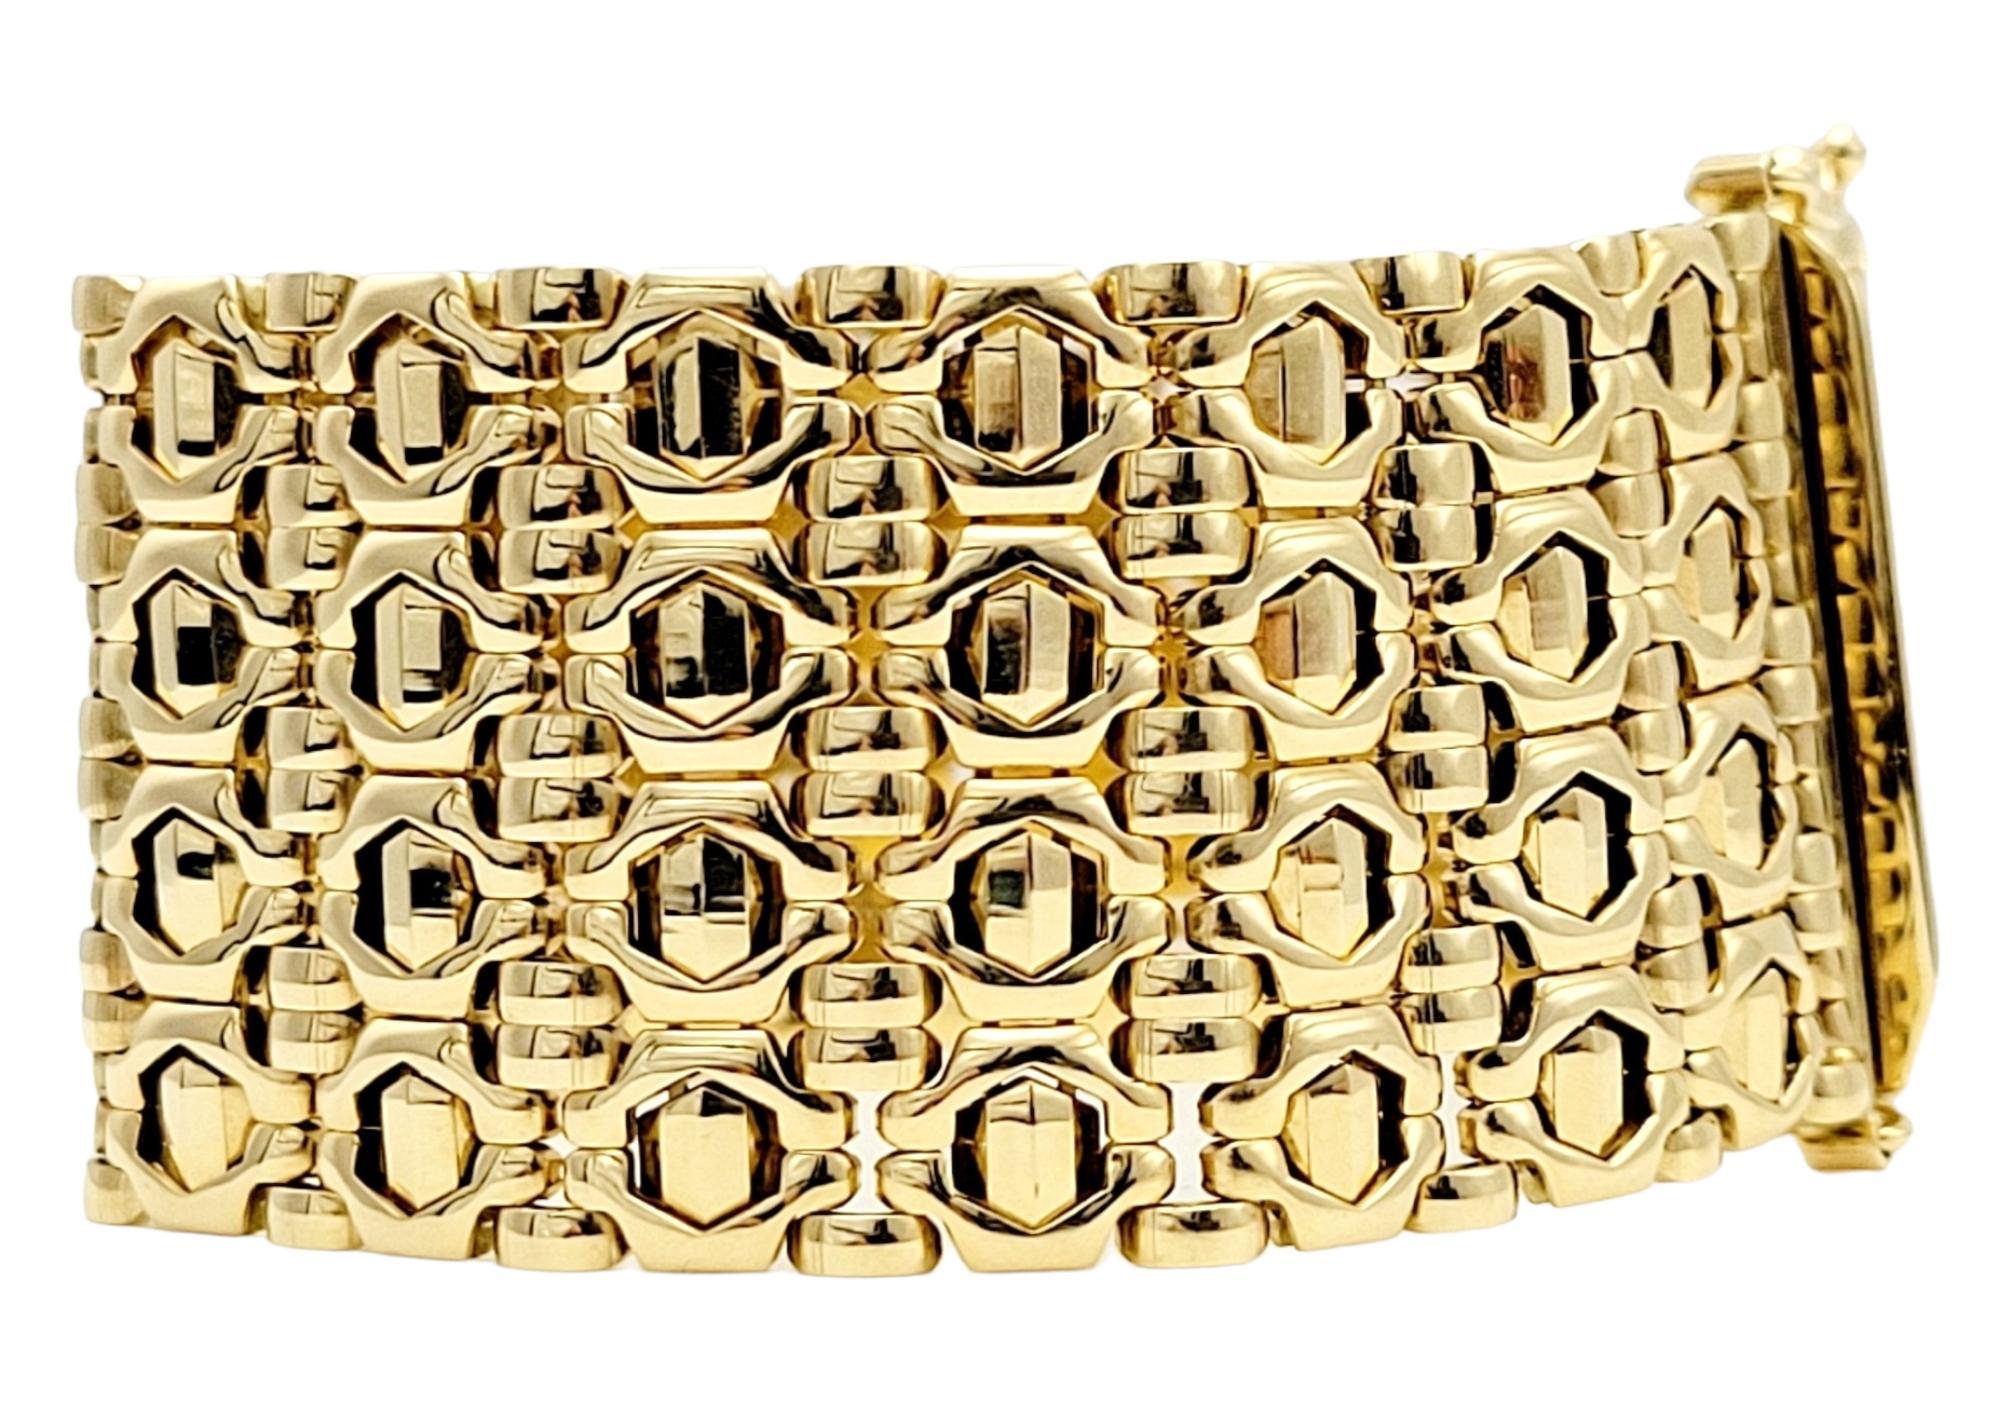 Add a touch of sophistication and style to your jewelry collection with this stunning Milor Italy polished gold bracelet. Crafted from high-quality 14-karat yellow gold, this bracelet features a wide and unique link band design that sets it apart